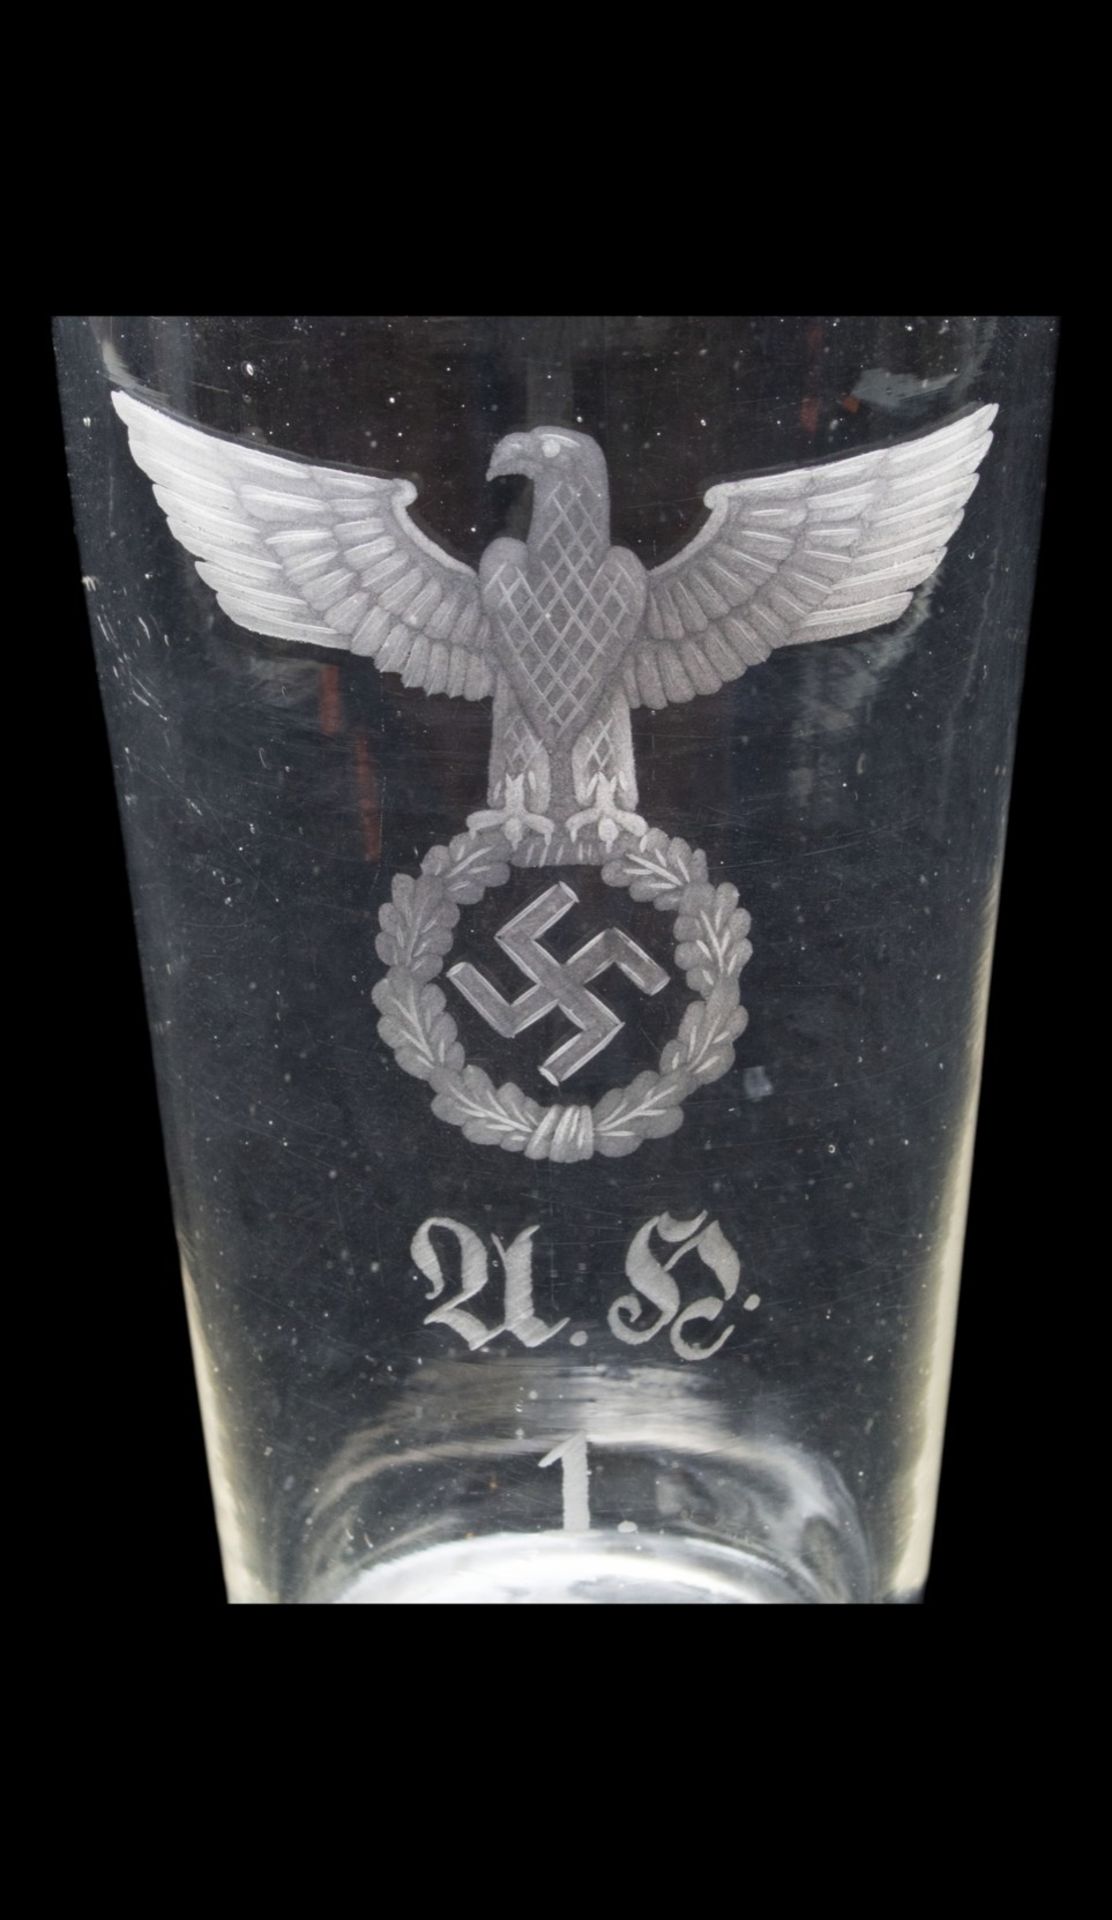 ADOLF HITLER'S NUMBERED BEER GLASS FROM THE BURGERBRAUKELLER - Image 6 of 7